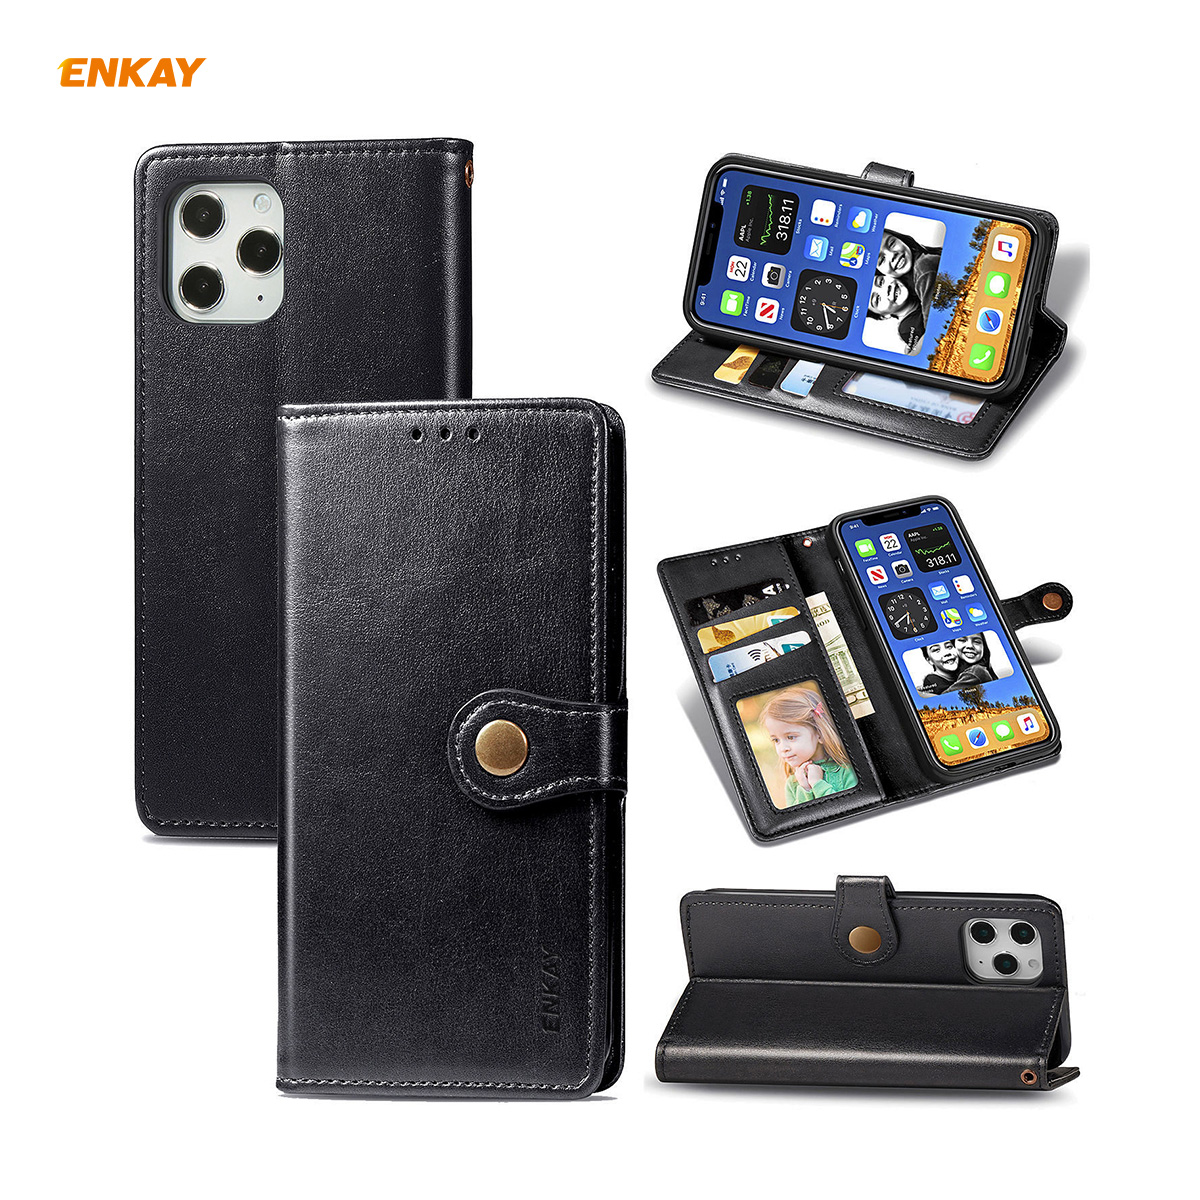 Enkay-for-iPhone-12-Pro-Max-Case-Retro-Litchi-Pattern-Flip-with-Mutiple-Card-Slots-Wallet-Stand-PU-L-1755116-5